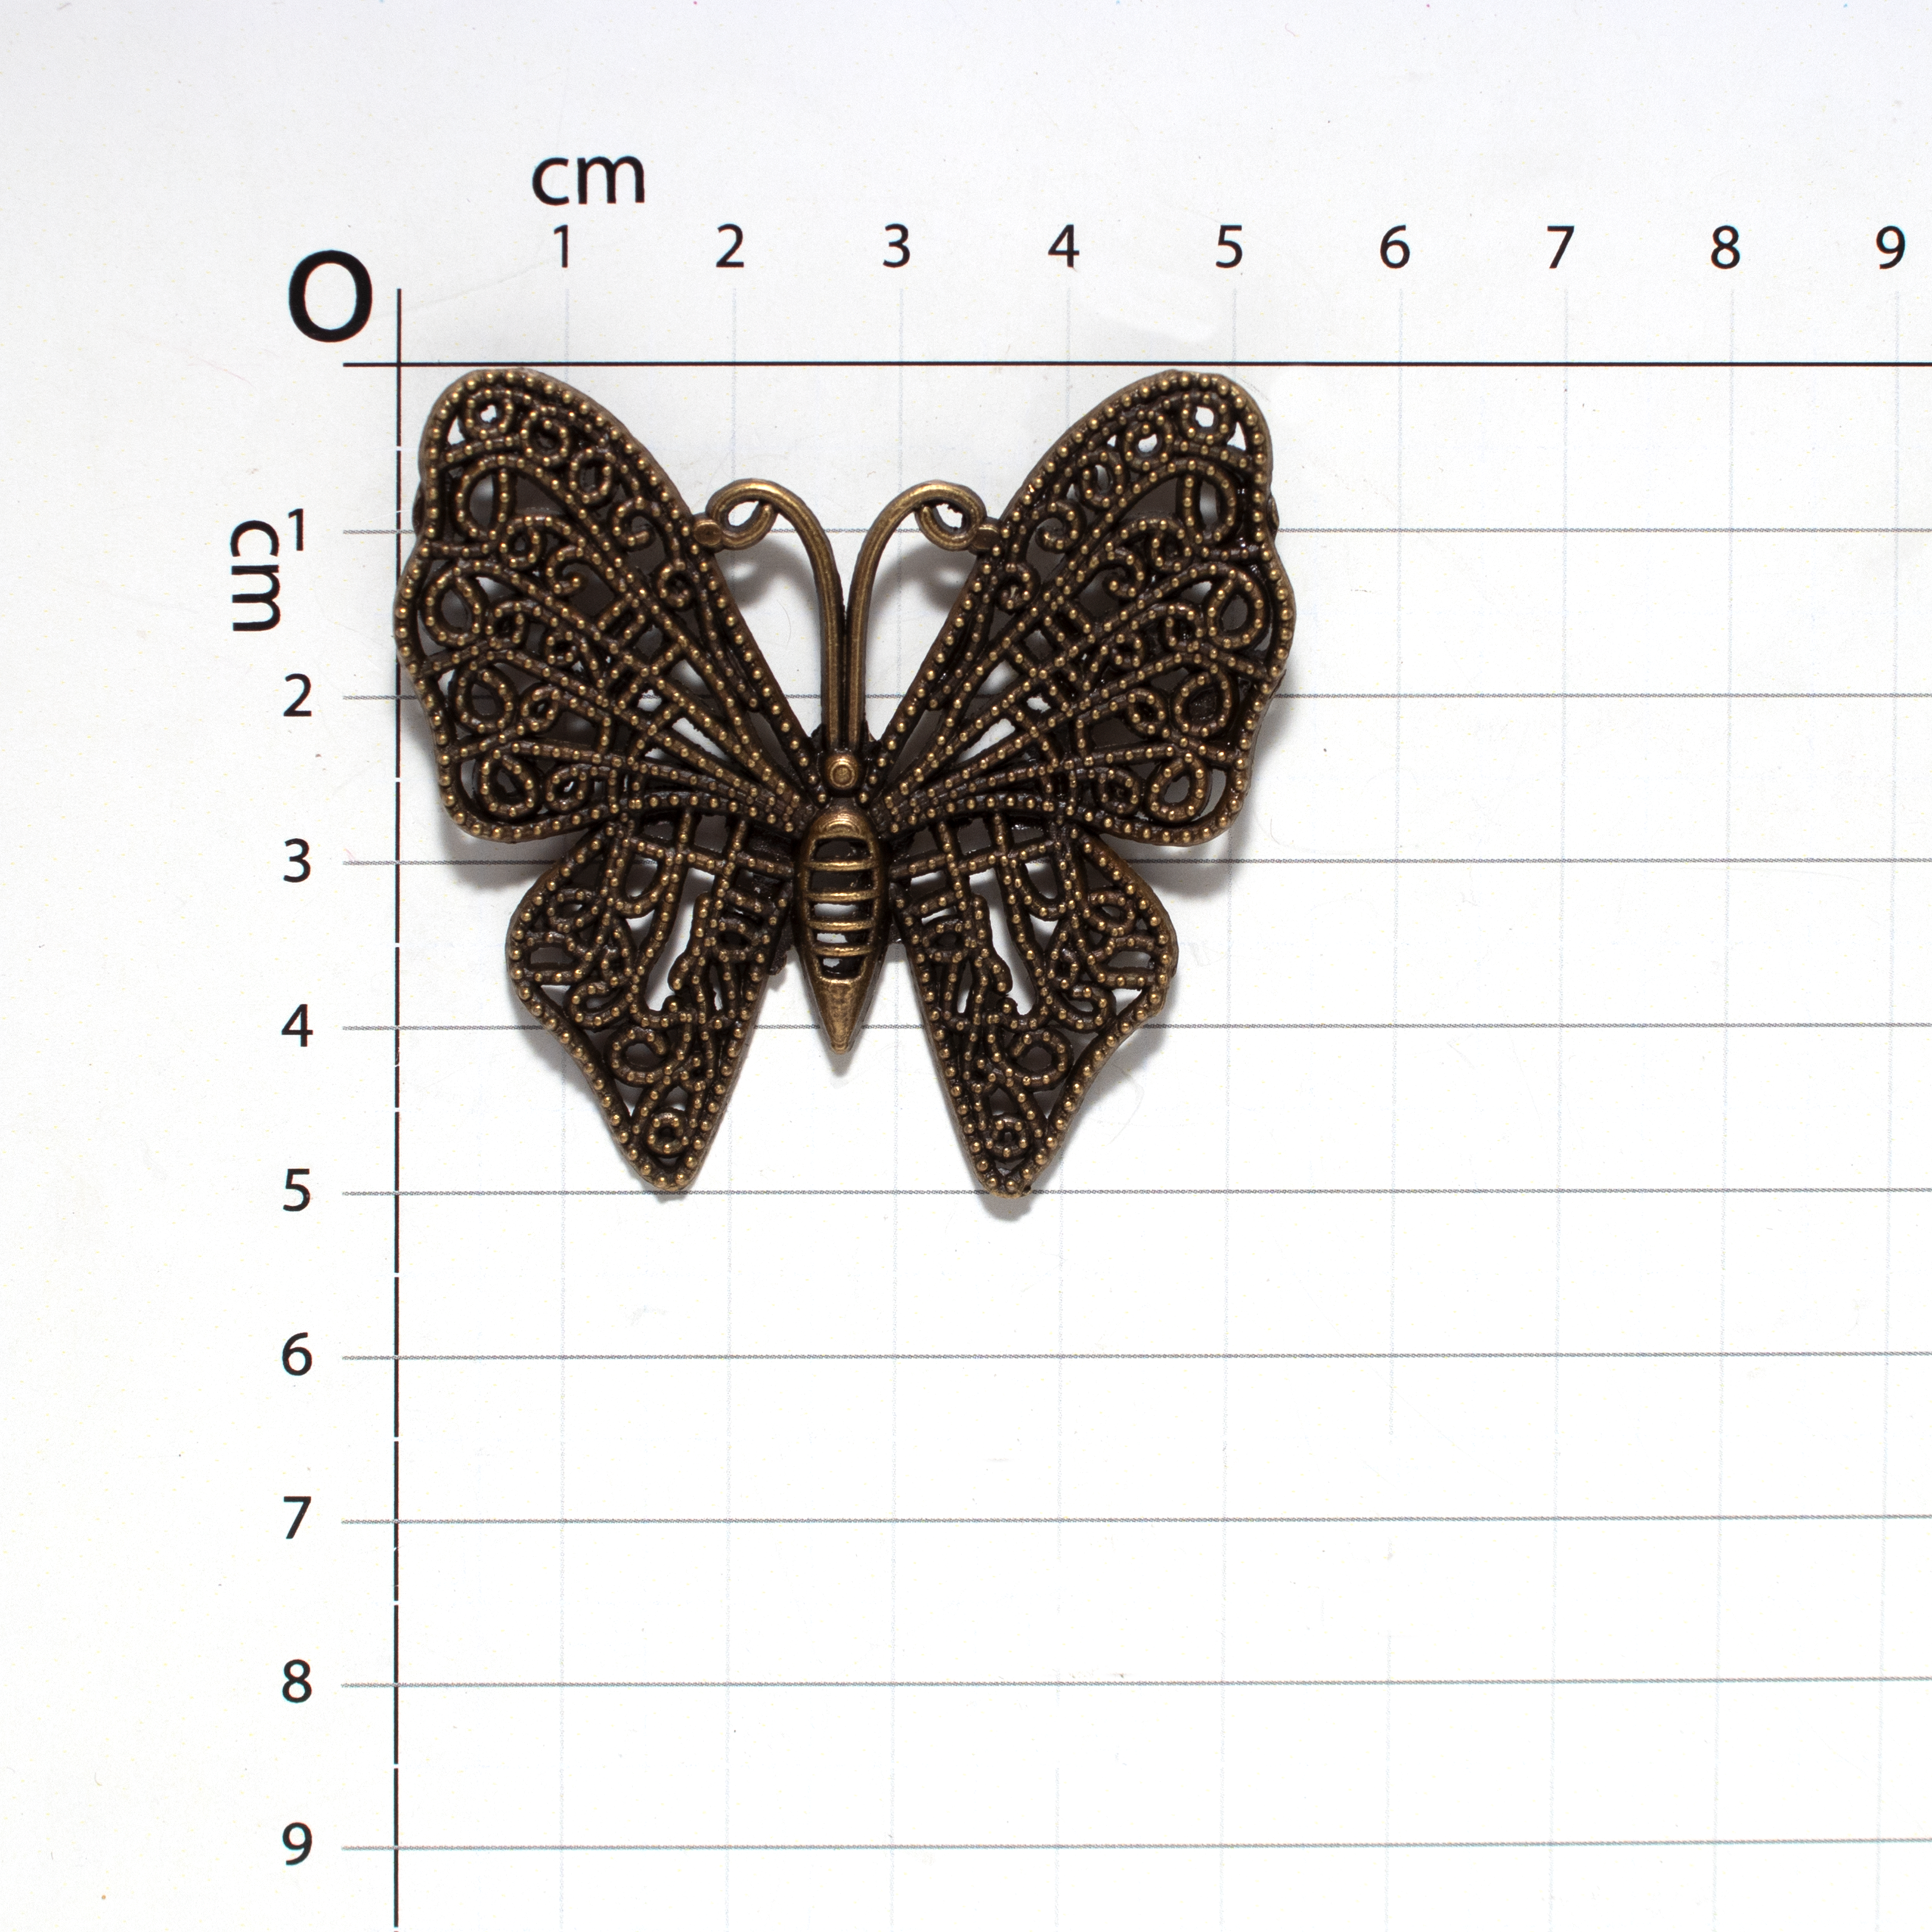 Metal Charms Ornate Butterfly 1Pc Pbci Ib